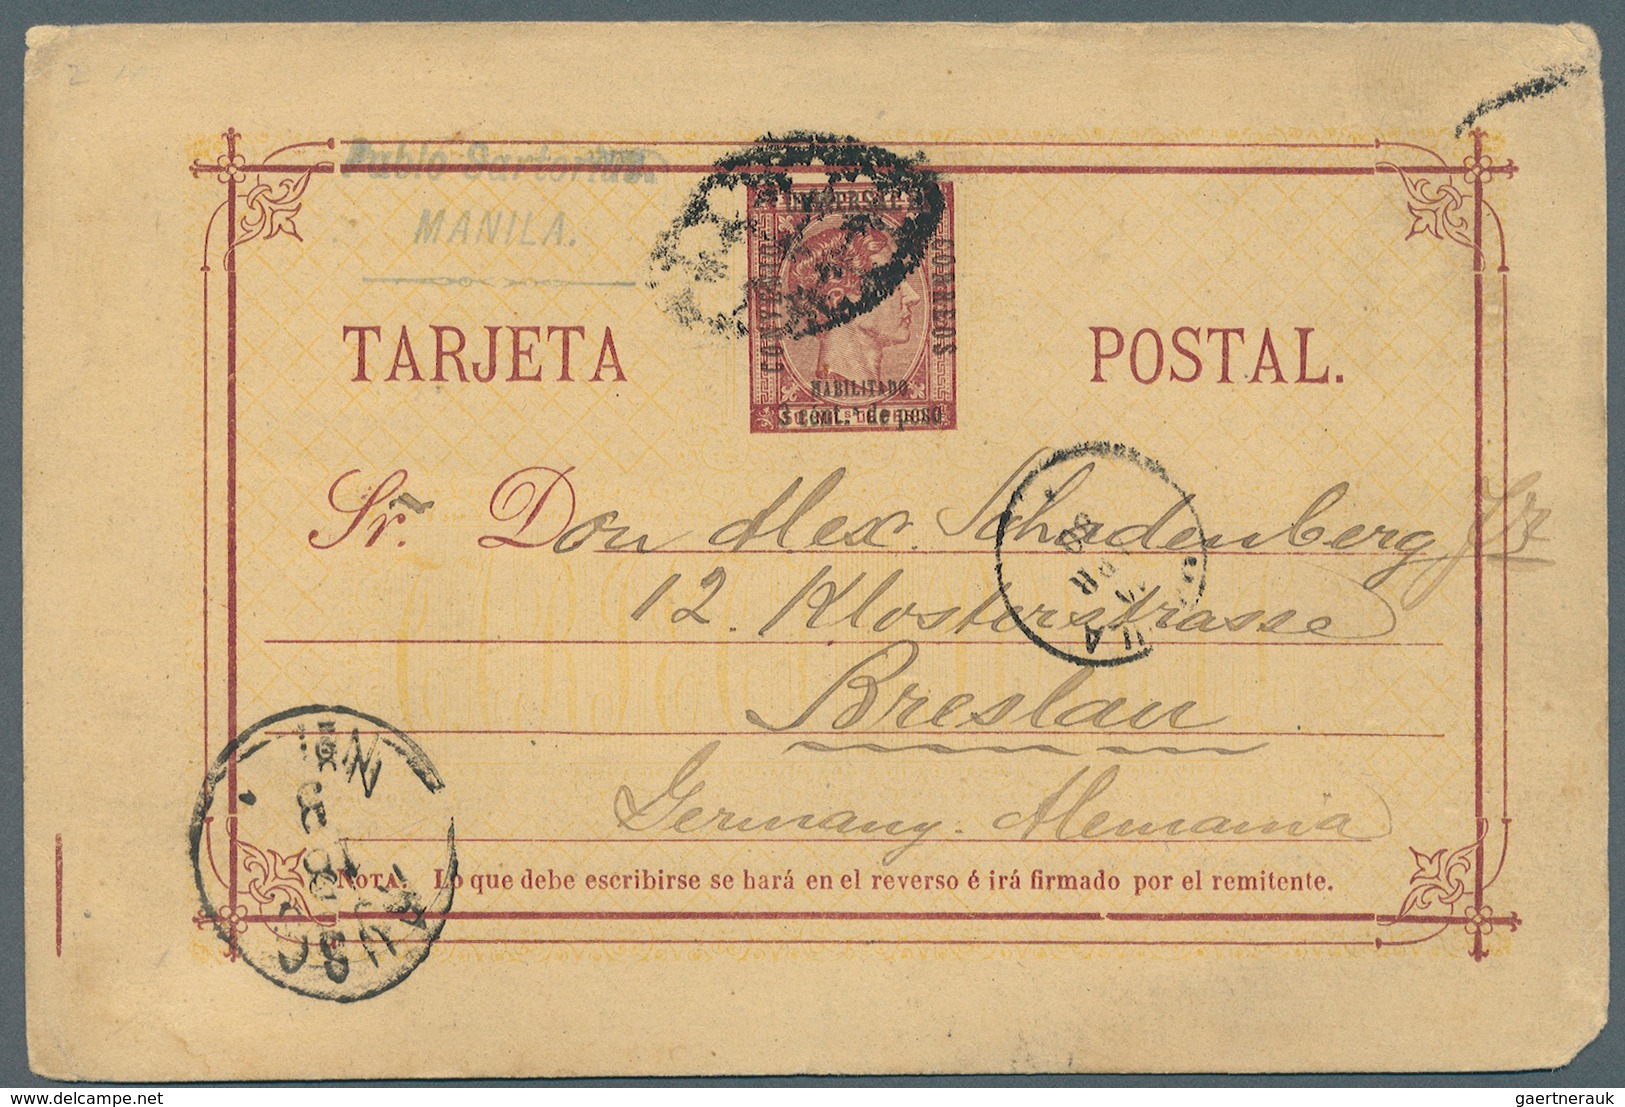 00409 Philippinen: 1880 UPU Surcharge 3c/50c, Tied By Oval Cancel Of Crosses In Association With Manila Di - Philippines